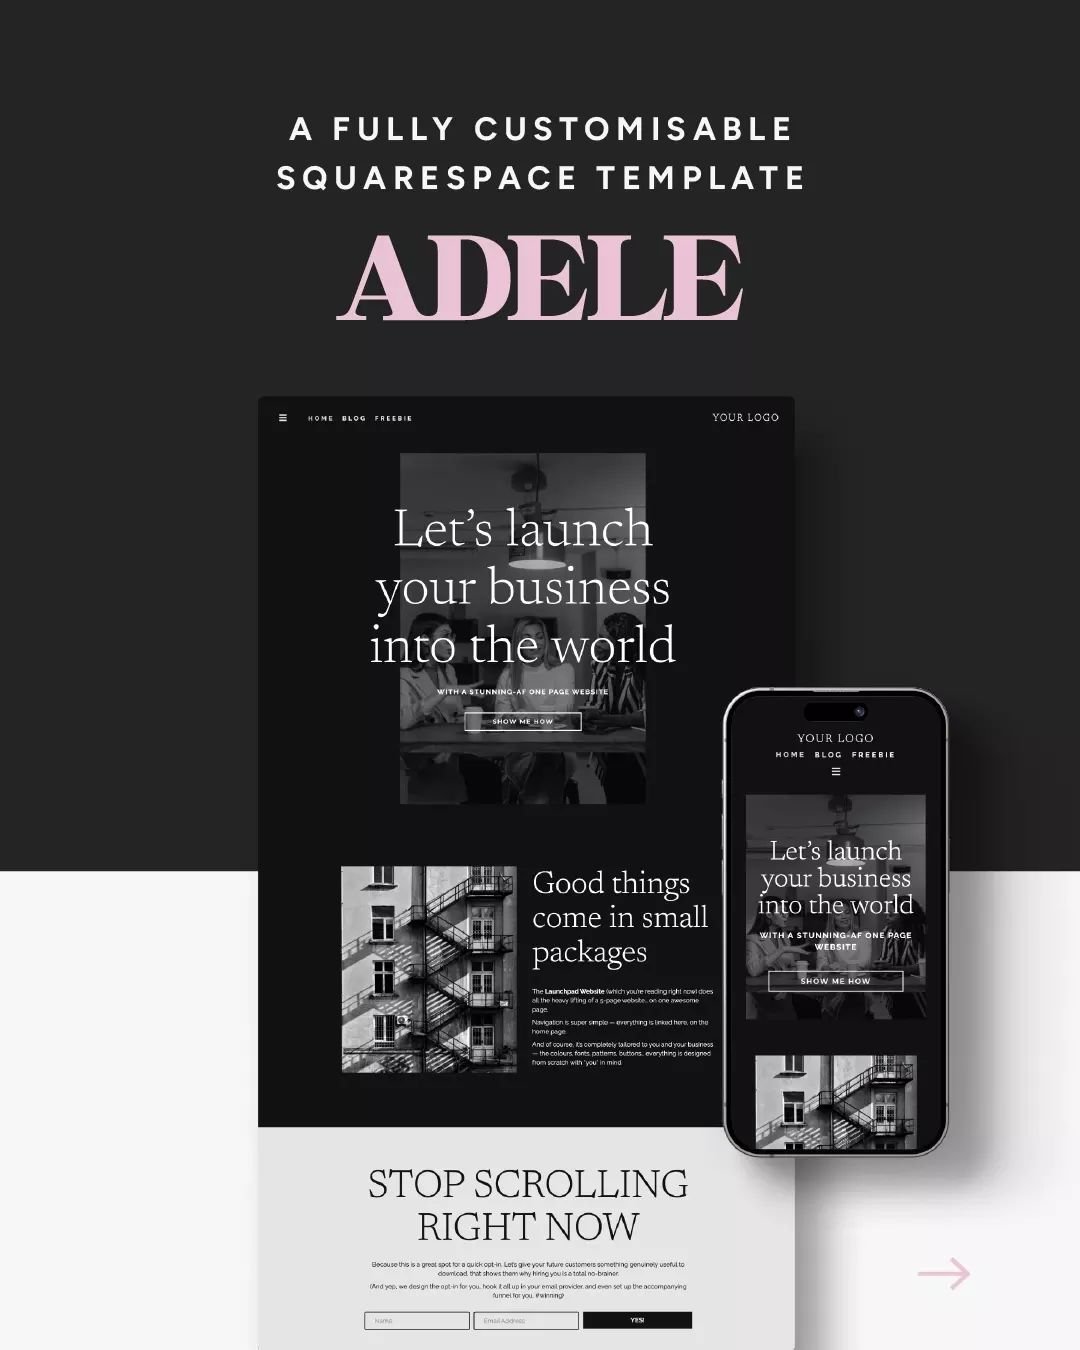 ✅ Sleek
✅ Effortless to use
✅ Infinitely customisable 

Nope, these aren&rsquo;t oxymorons

Our Adele template is a stunner - and she can handle a variety of different visual styles with grace. 

Wanna see the evidence? 

Click through to see her dec